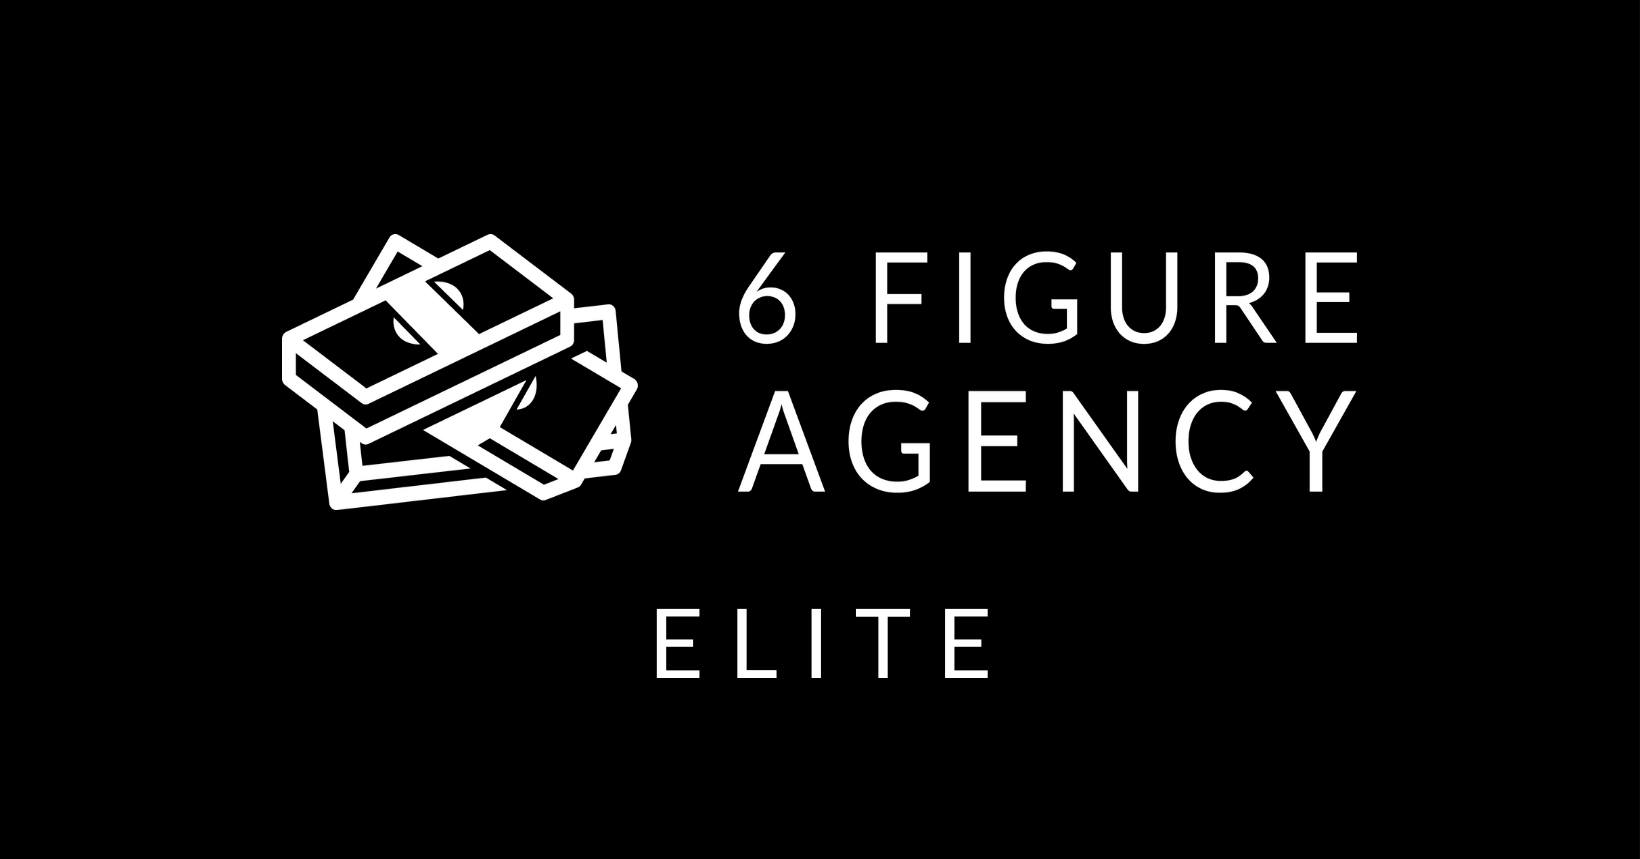 6 Figure Agency Elite, Tuesday, May 4, 2021, Press release picture